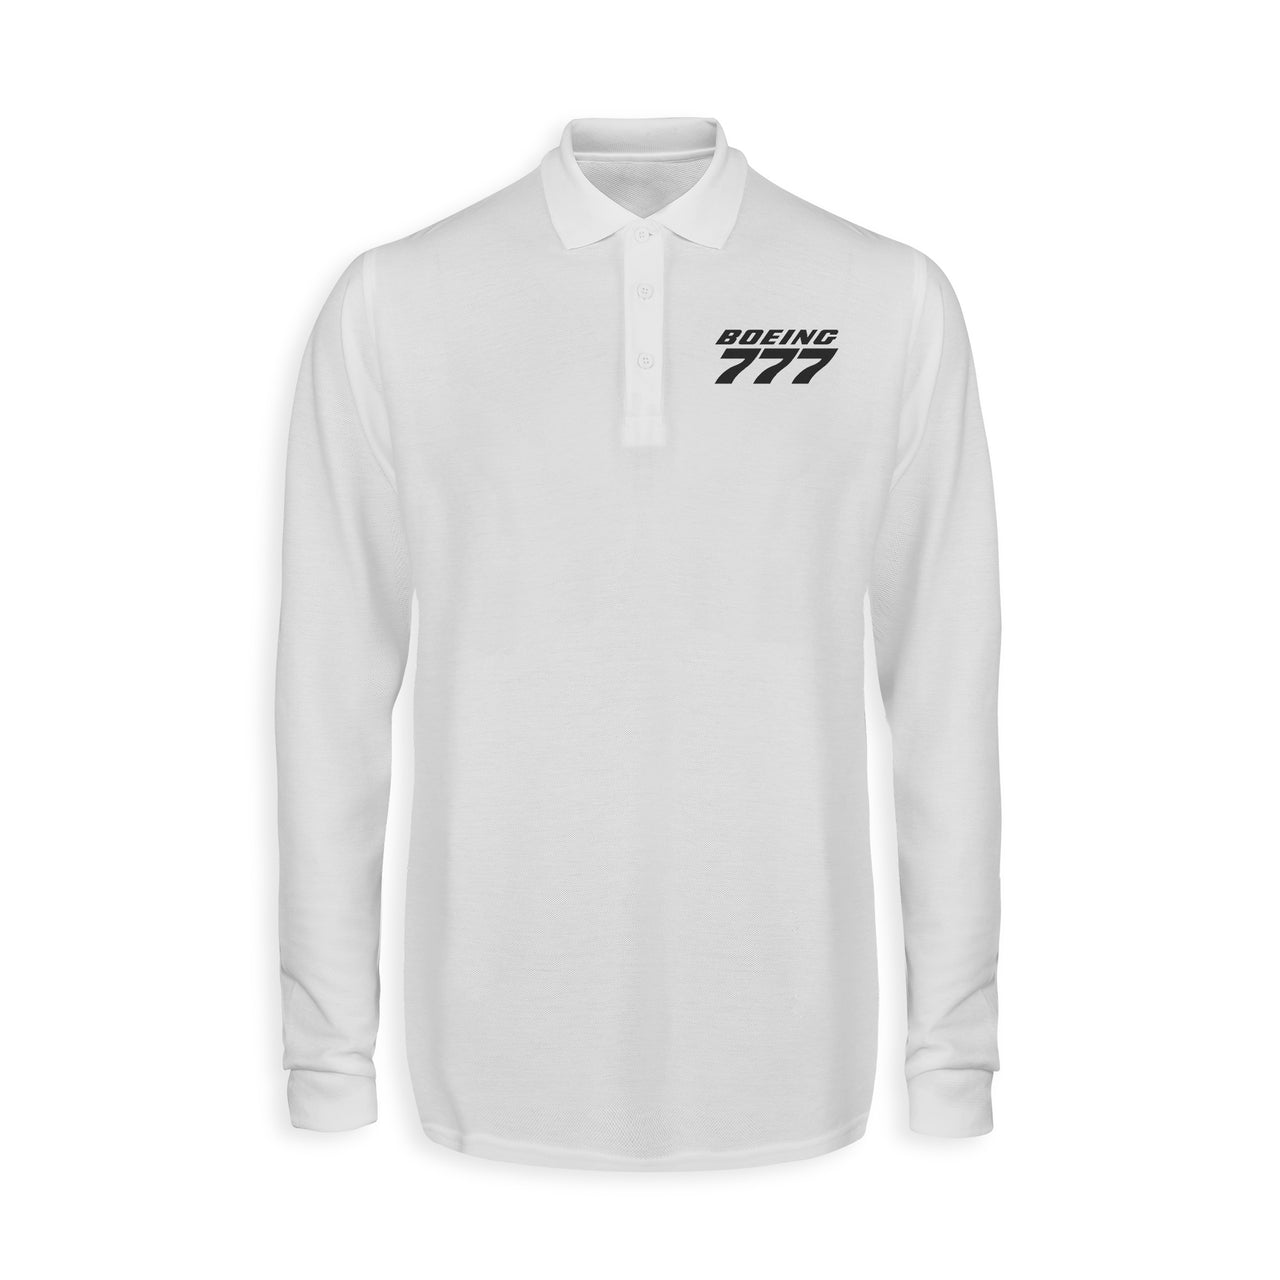 Boeing 777 & Text Designed Long Sleeve Polo T-Shirts